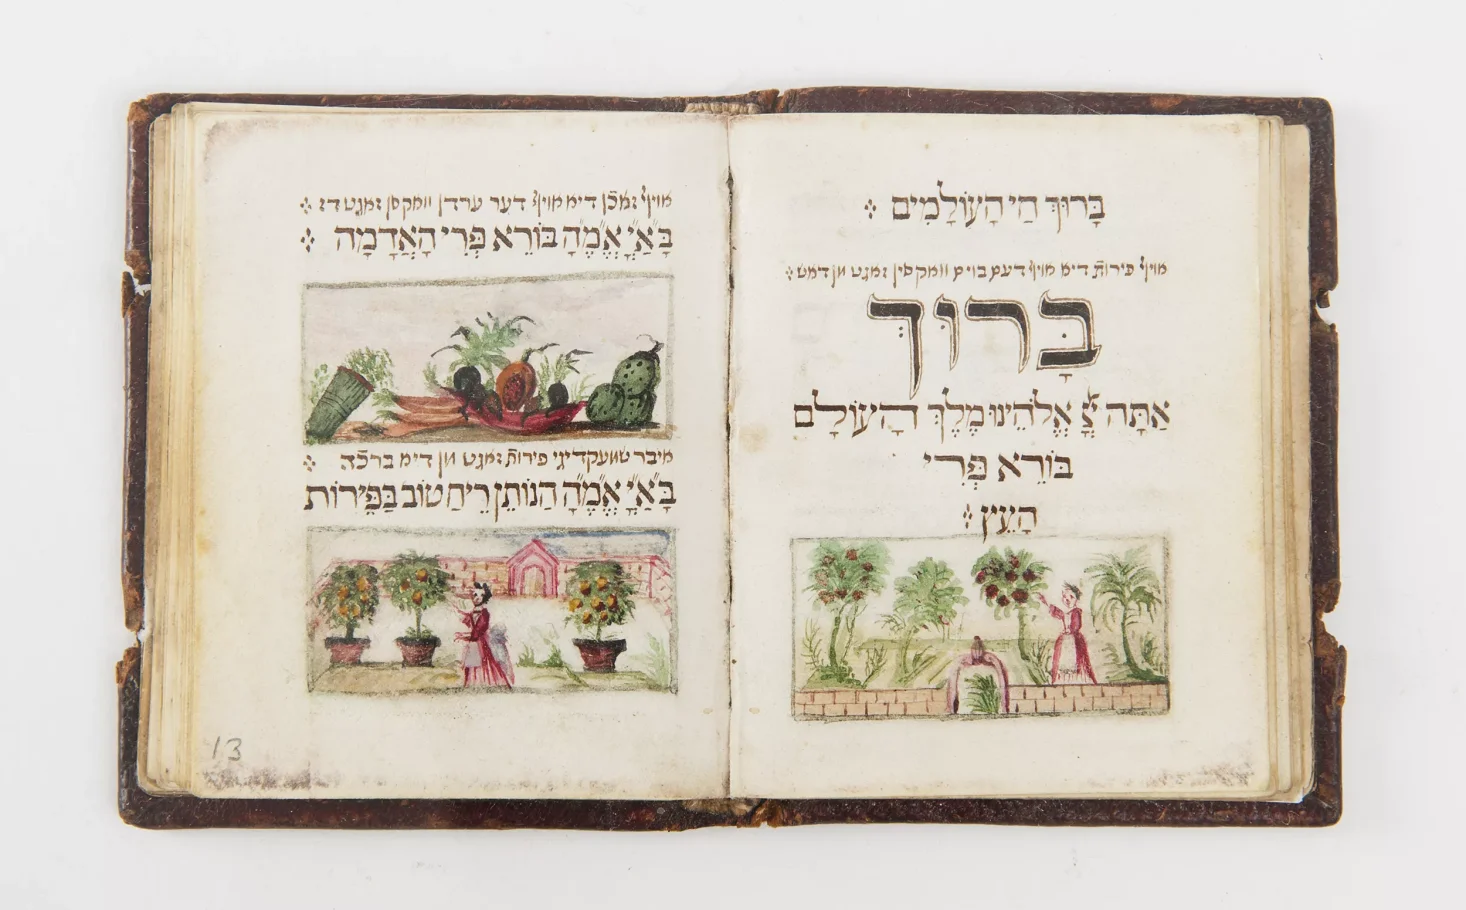 On the book page there are two colorful illustrations. The upper one shows various vegetables, the lower one shows the female in front of the fruit trees. In the background you can see the house.